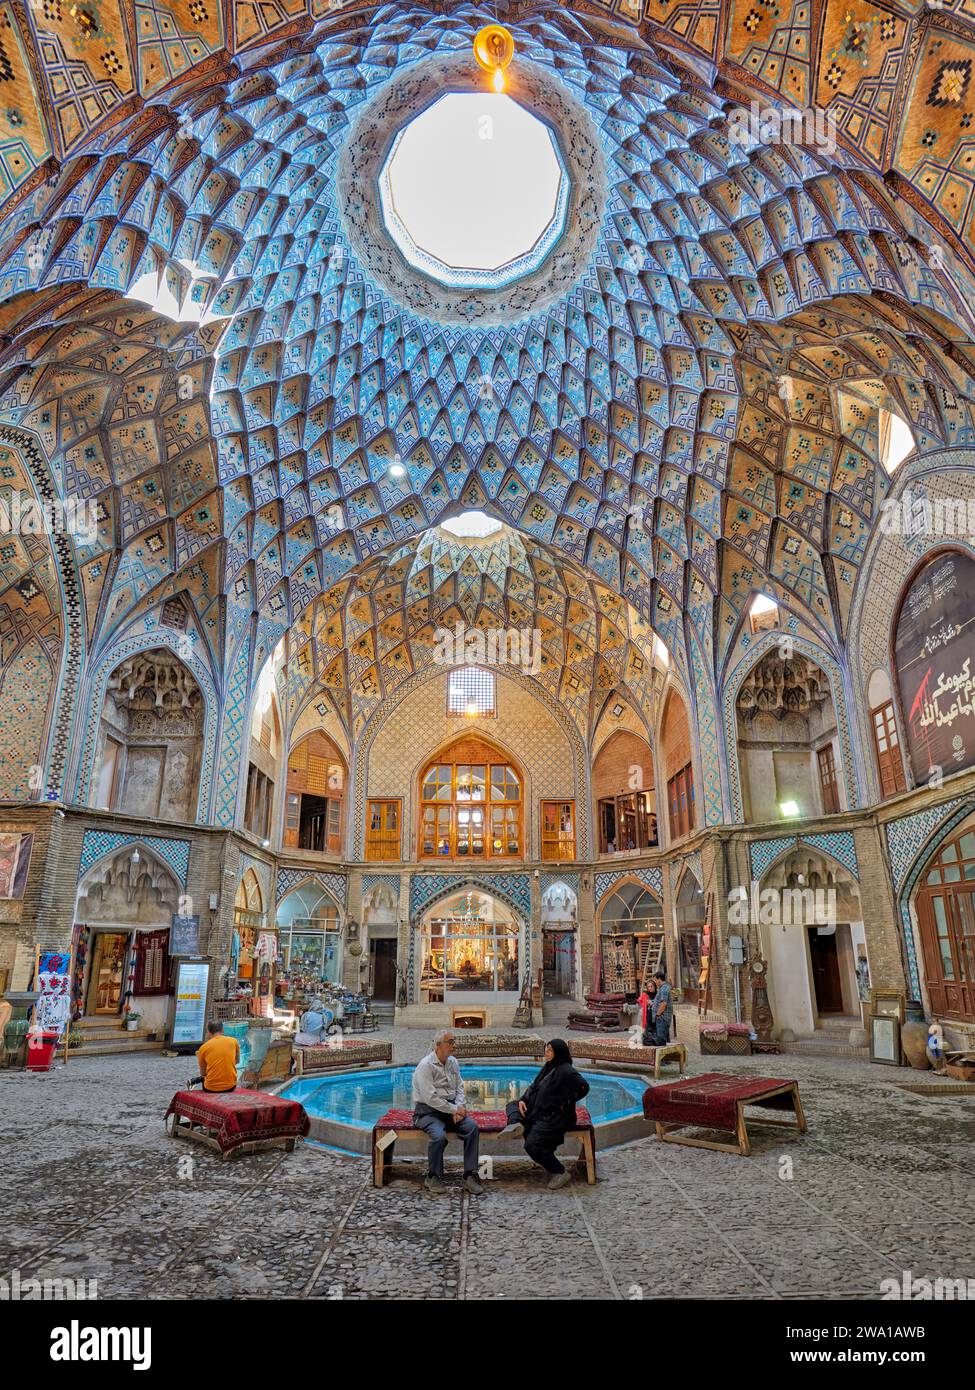 Domed ceiling with intricate geometric patterns in the Aminoddole Caravanserai, 16th century historic structure in the Grand Bazaar of Kashan, Iran. Stock Photo